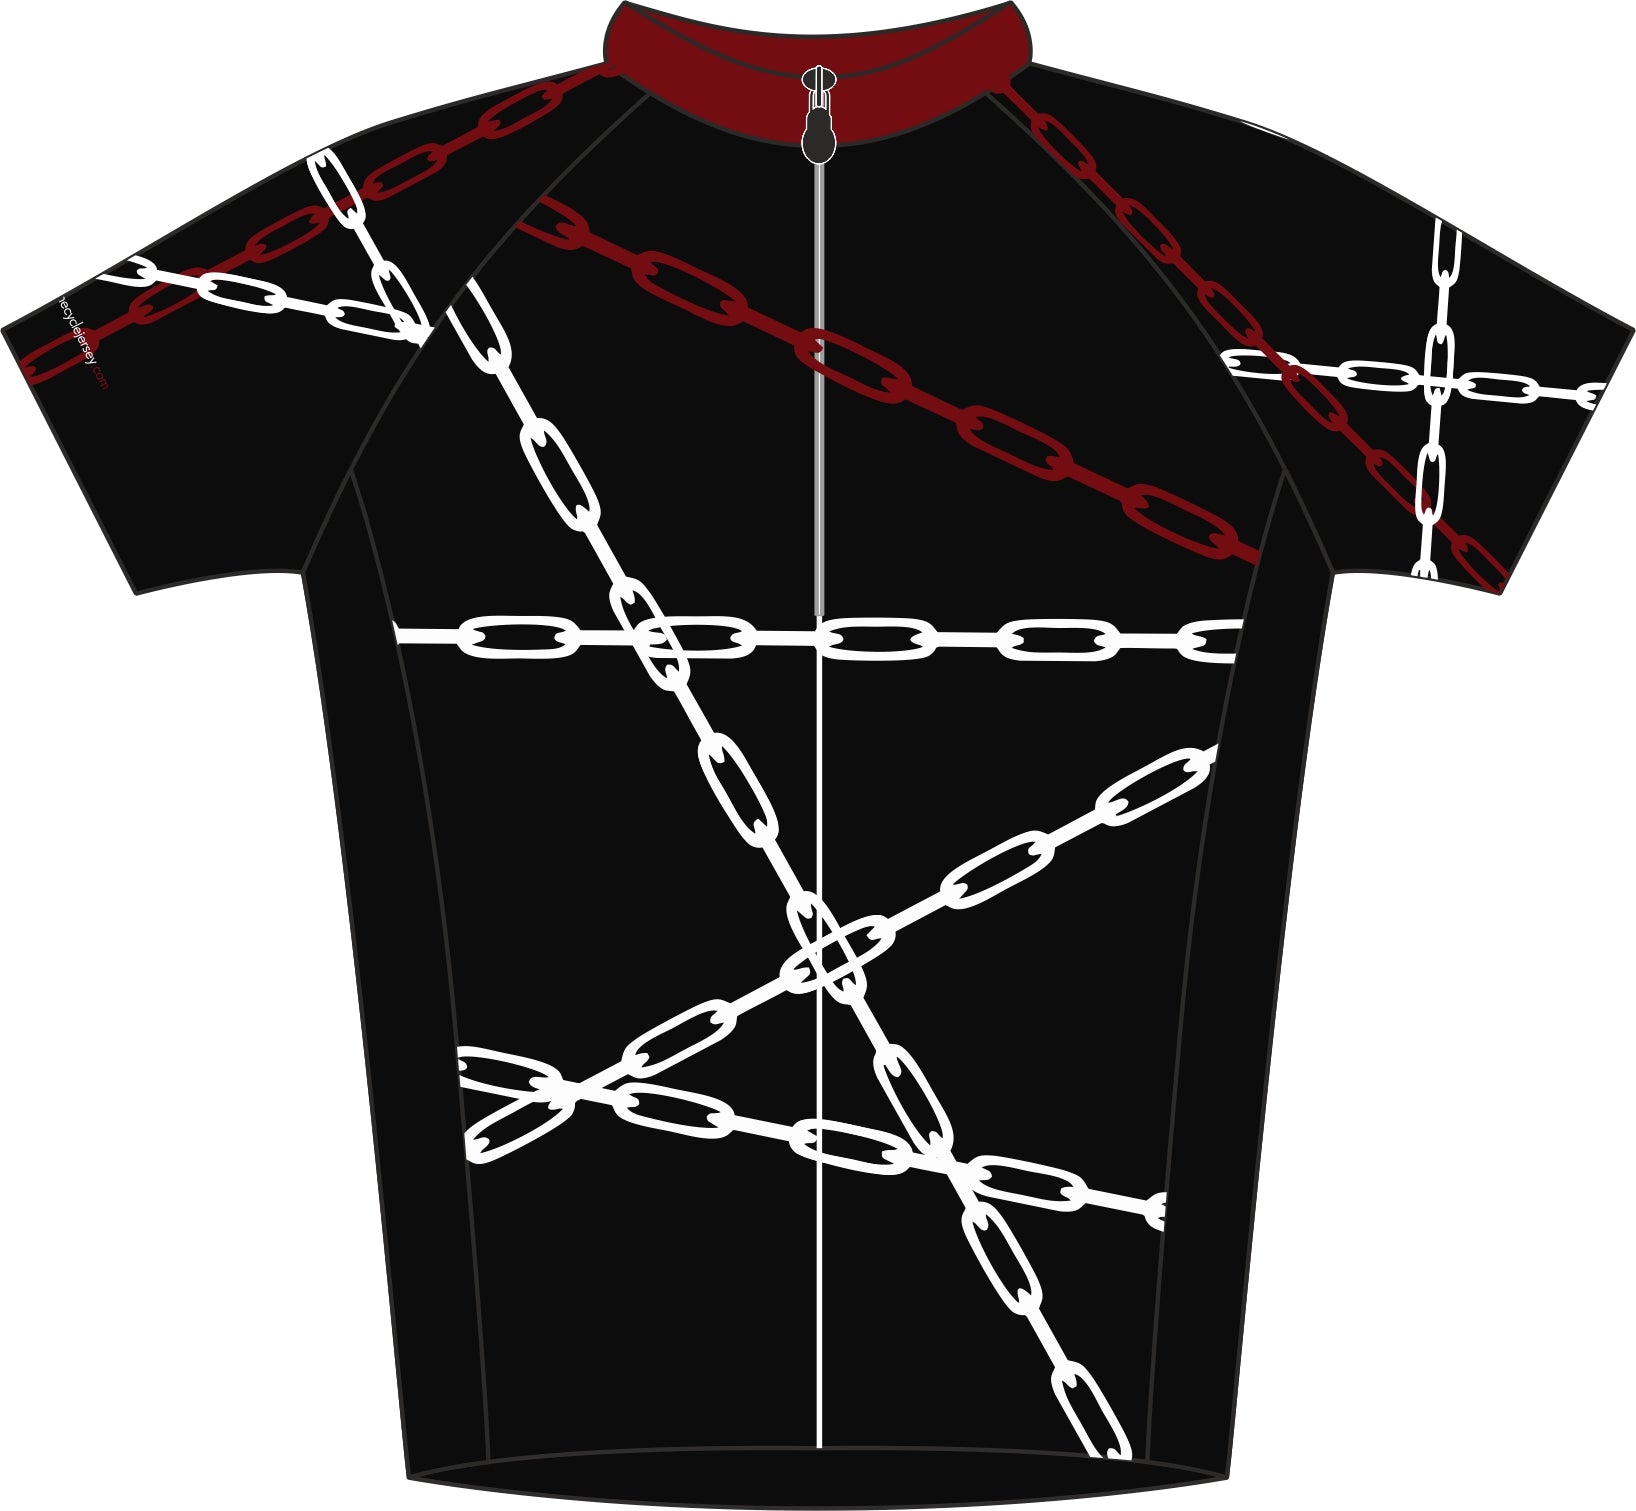 Tangled Chains Road Cycle Jersey Front